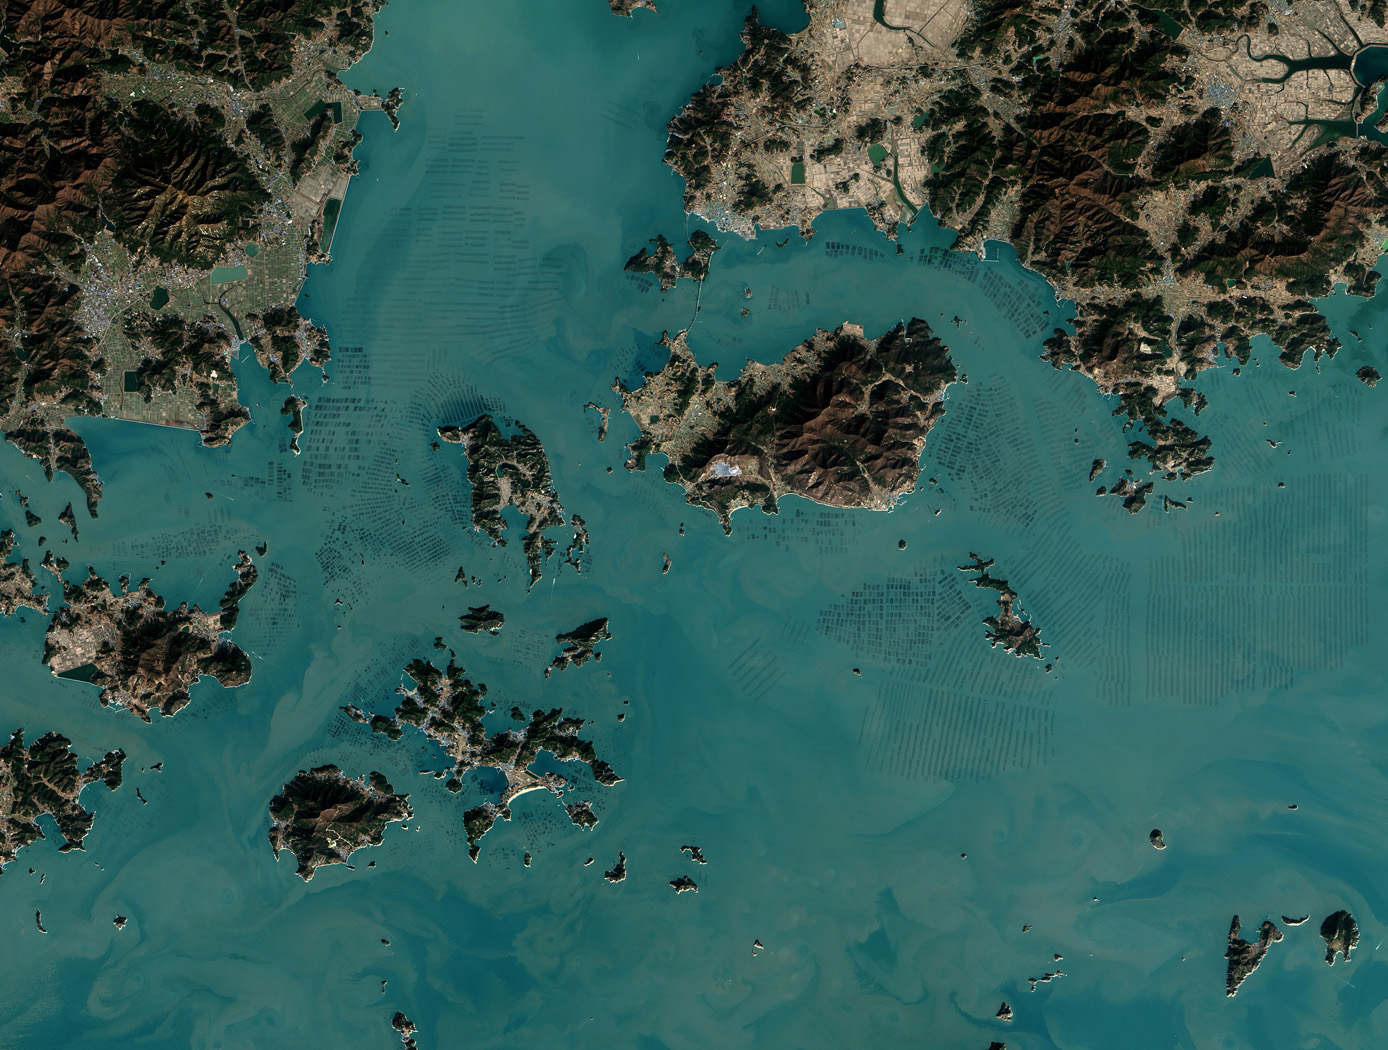 Seaweed Farms in South Korea acquired by The Operational Land Imager (OLI) on Landsat 8